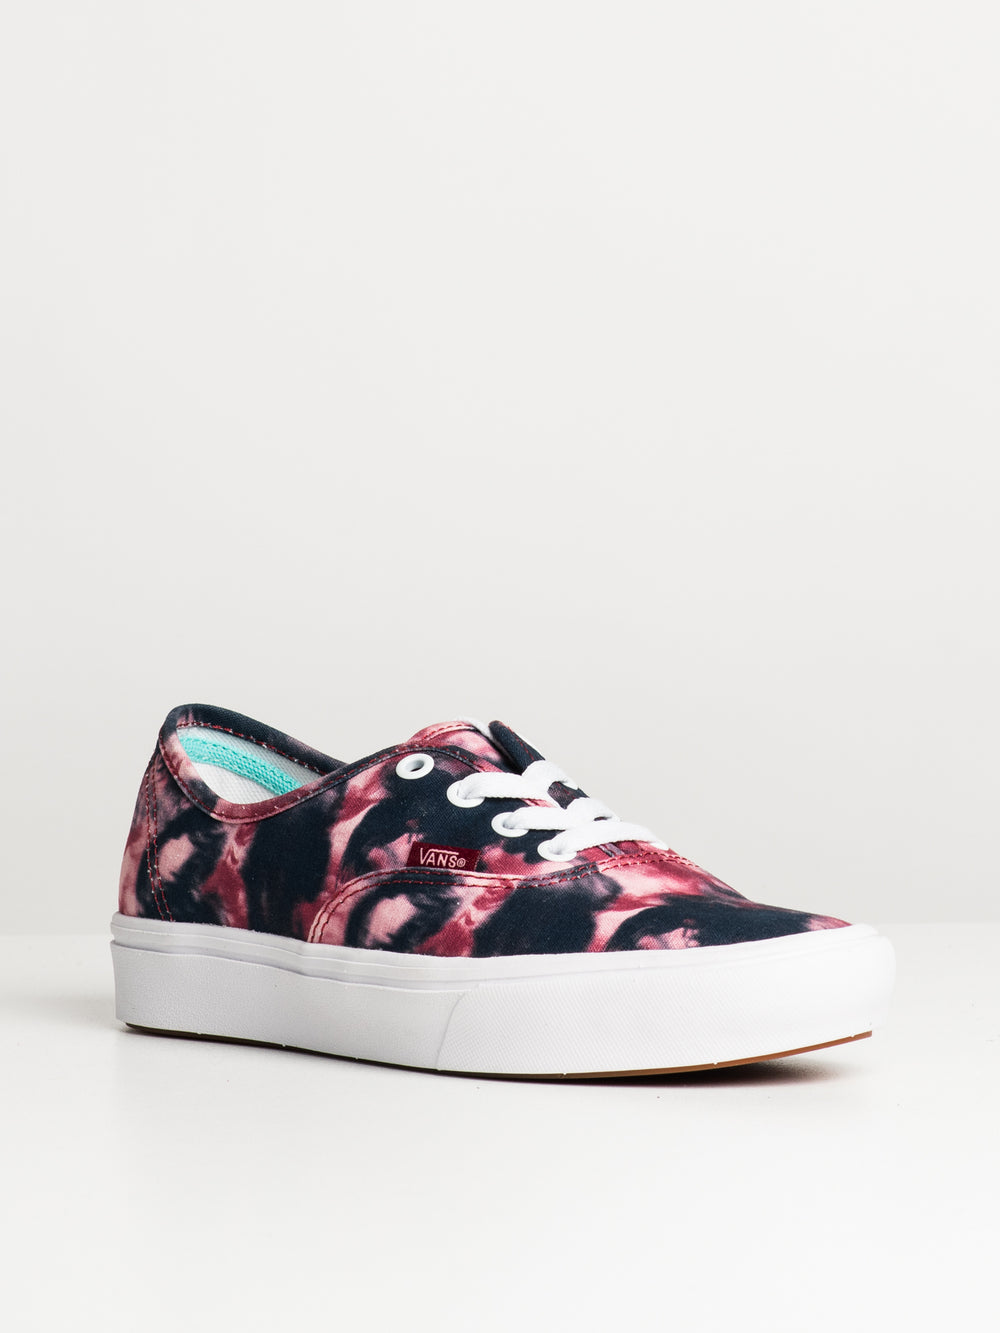 WOMENS VANS COMFYCUSH AUTHENTIC GRUNGE SNEAKER - CLEARANCE